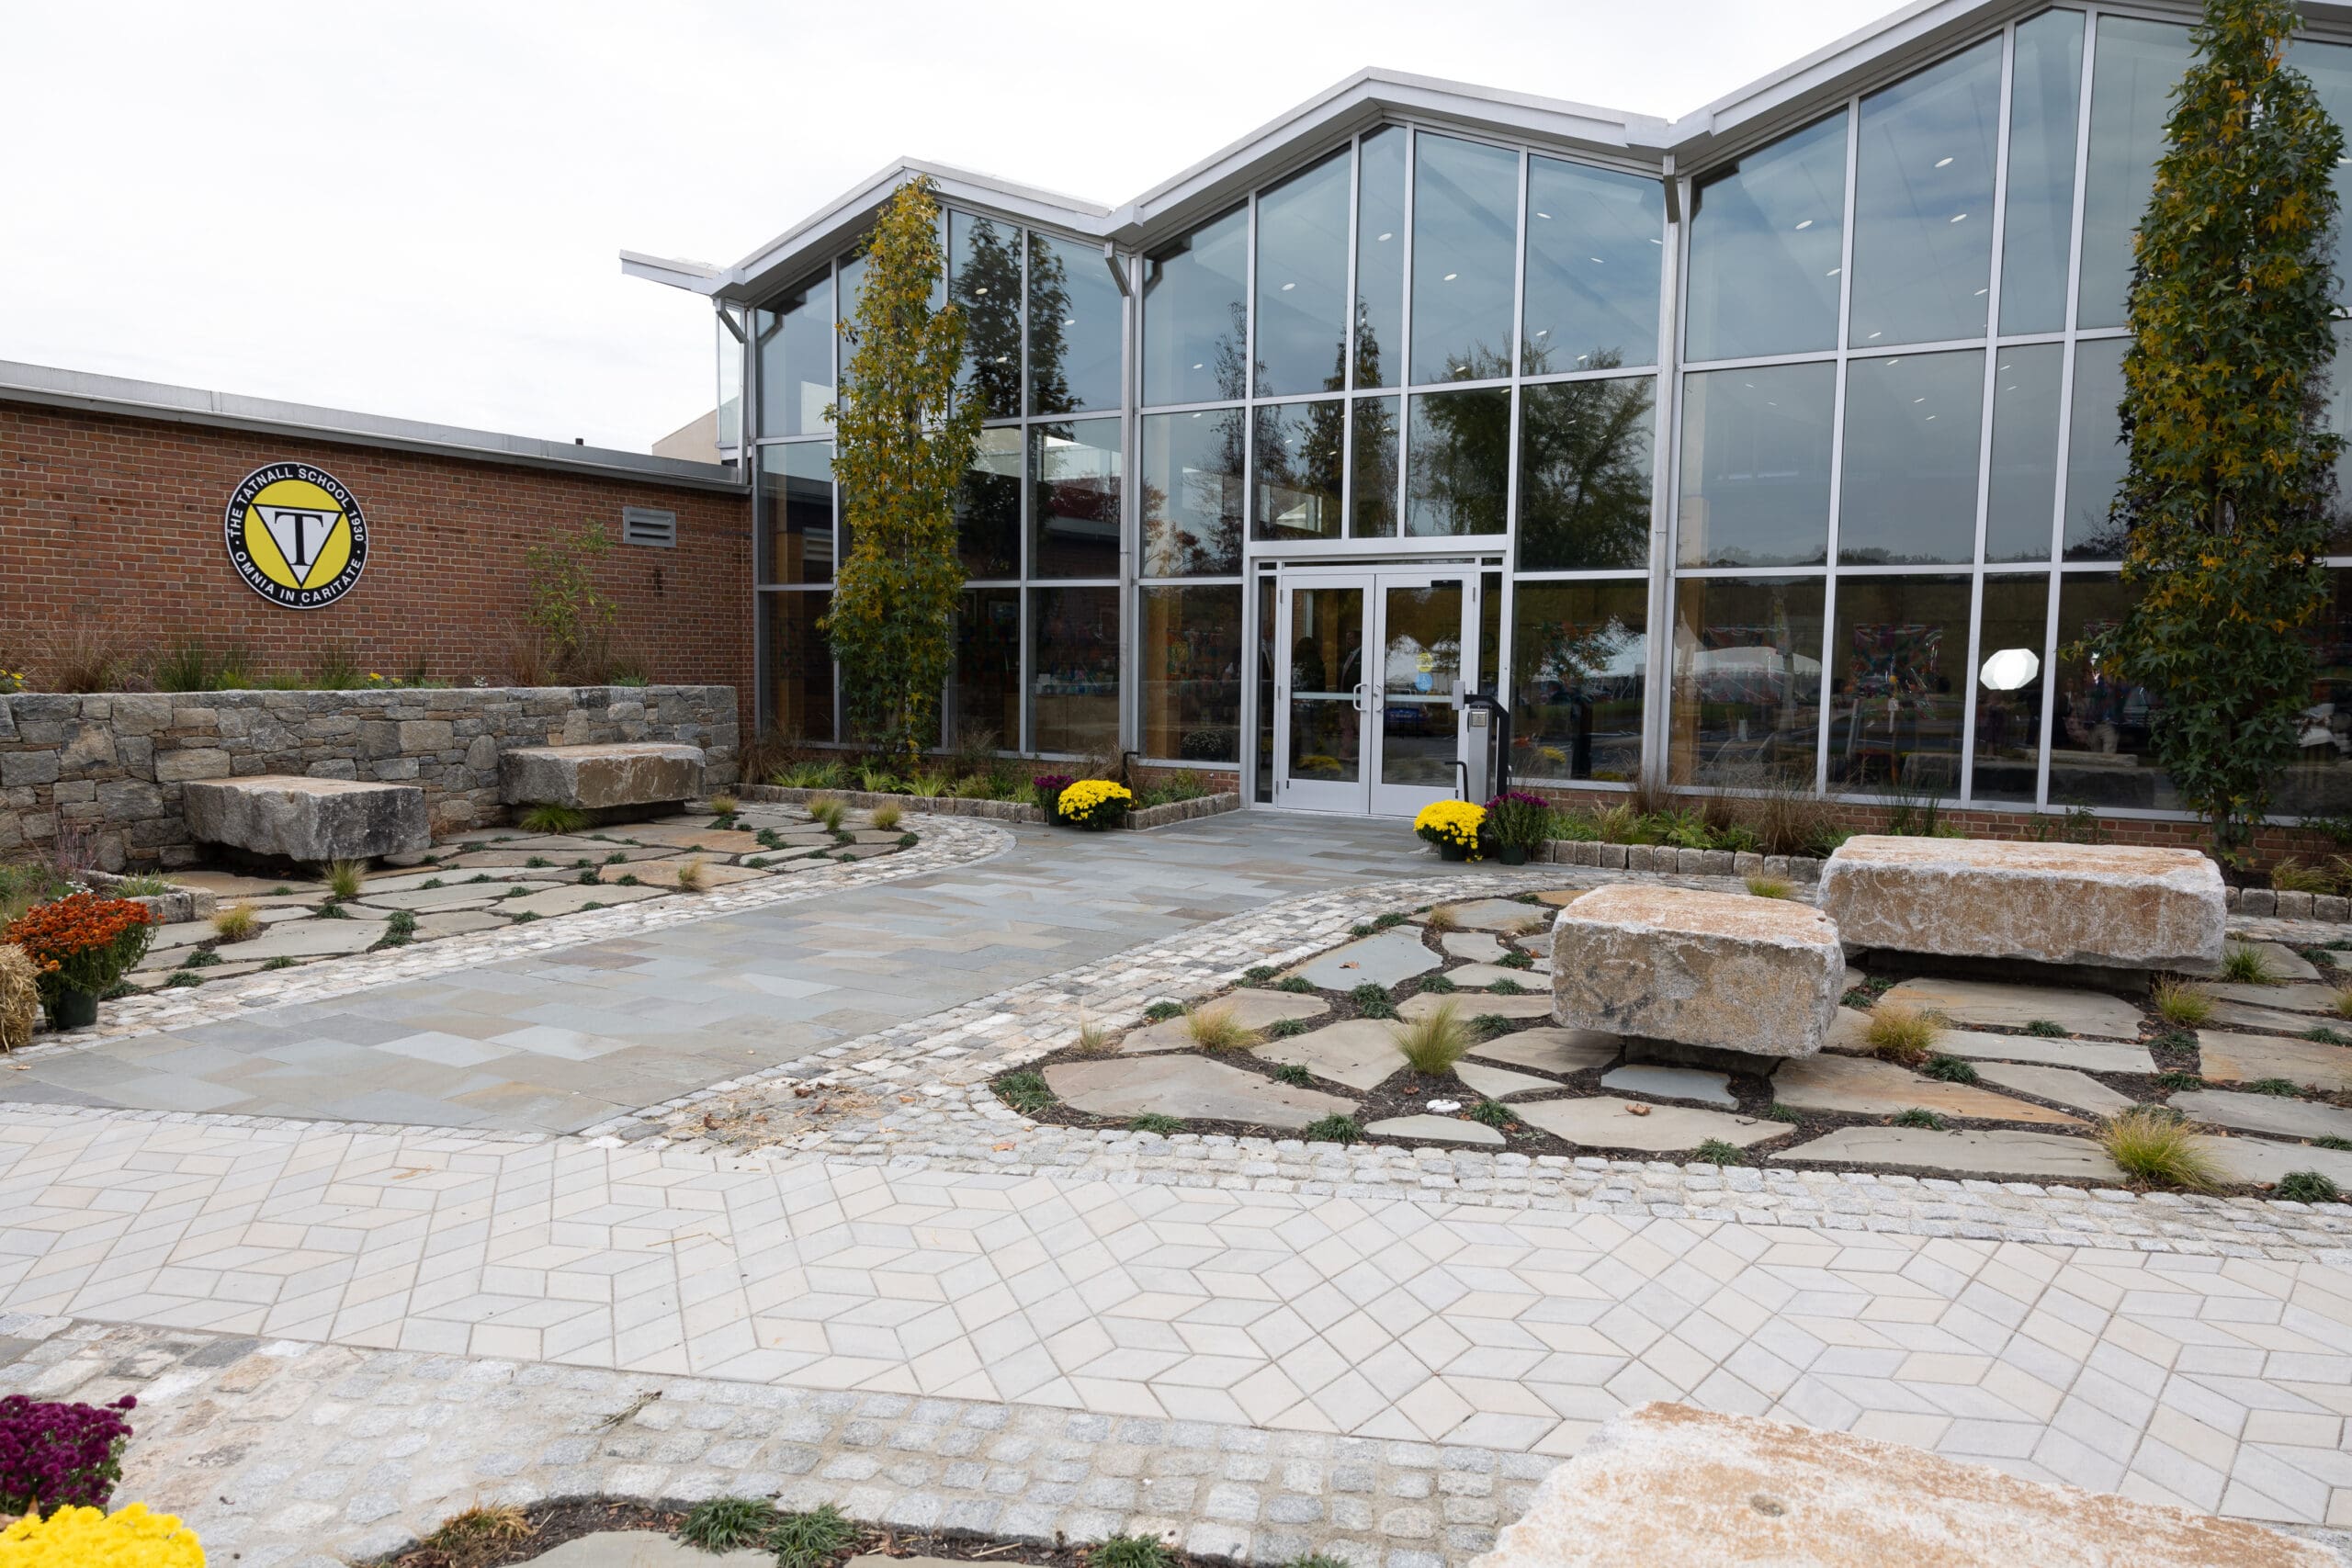 Tatnall School's new library opened up this school year.